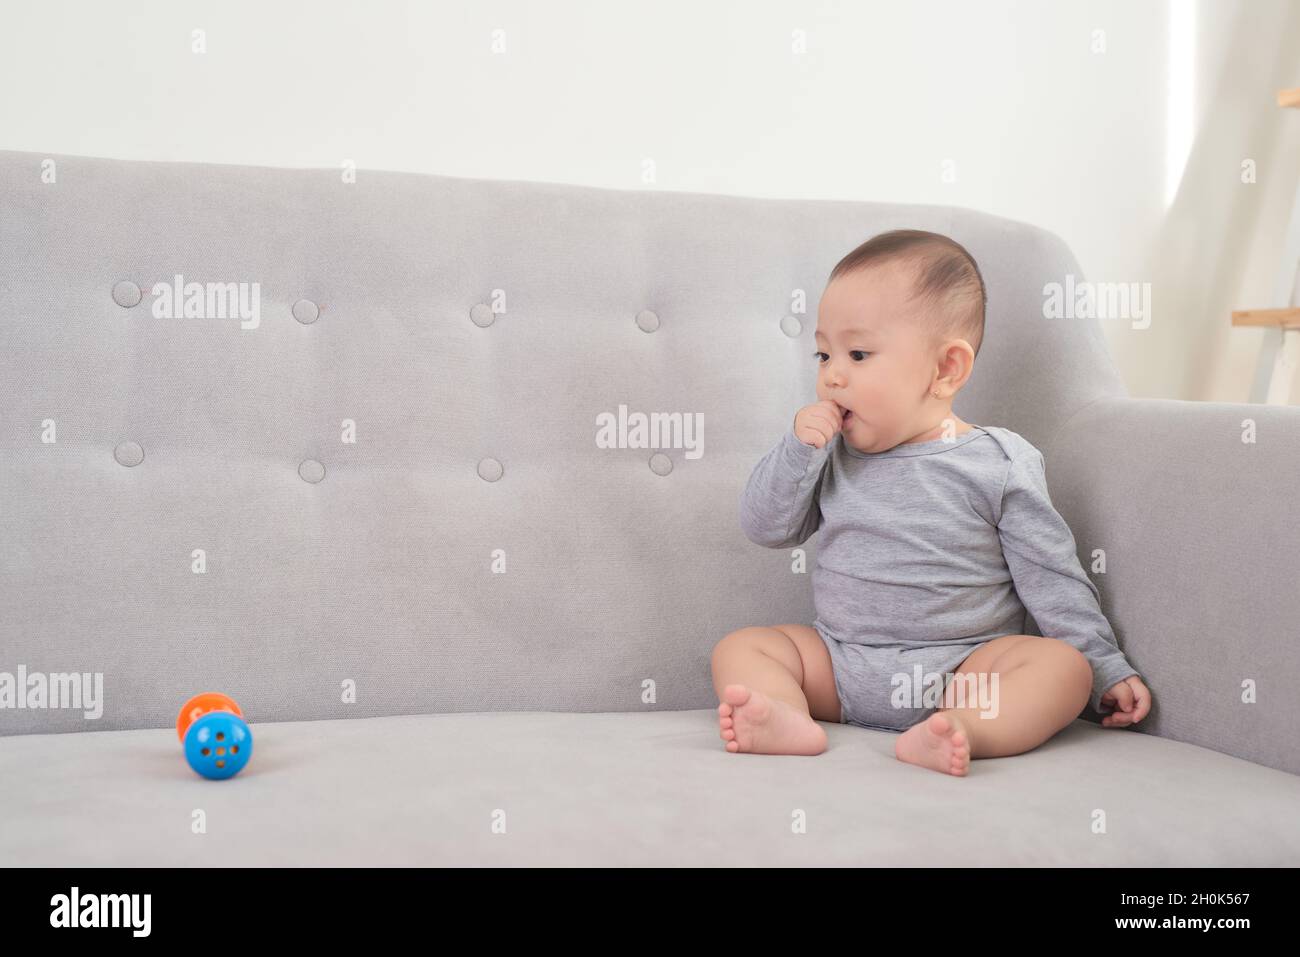 pretty baby sitting and smiling on the sofa Stock Photo